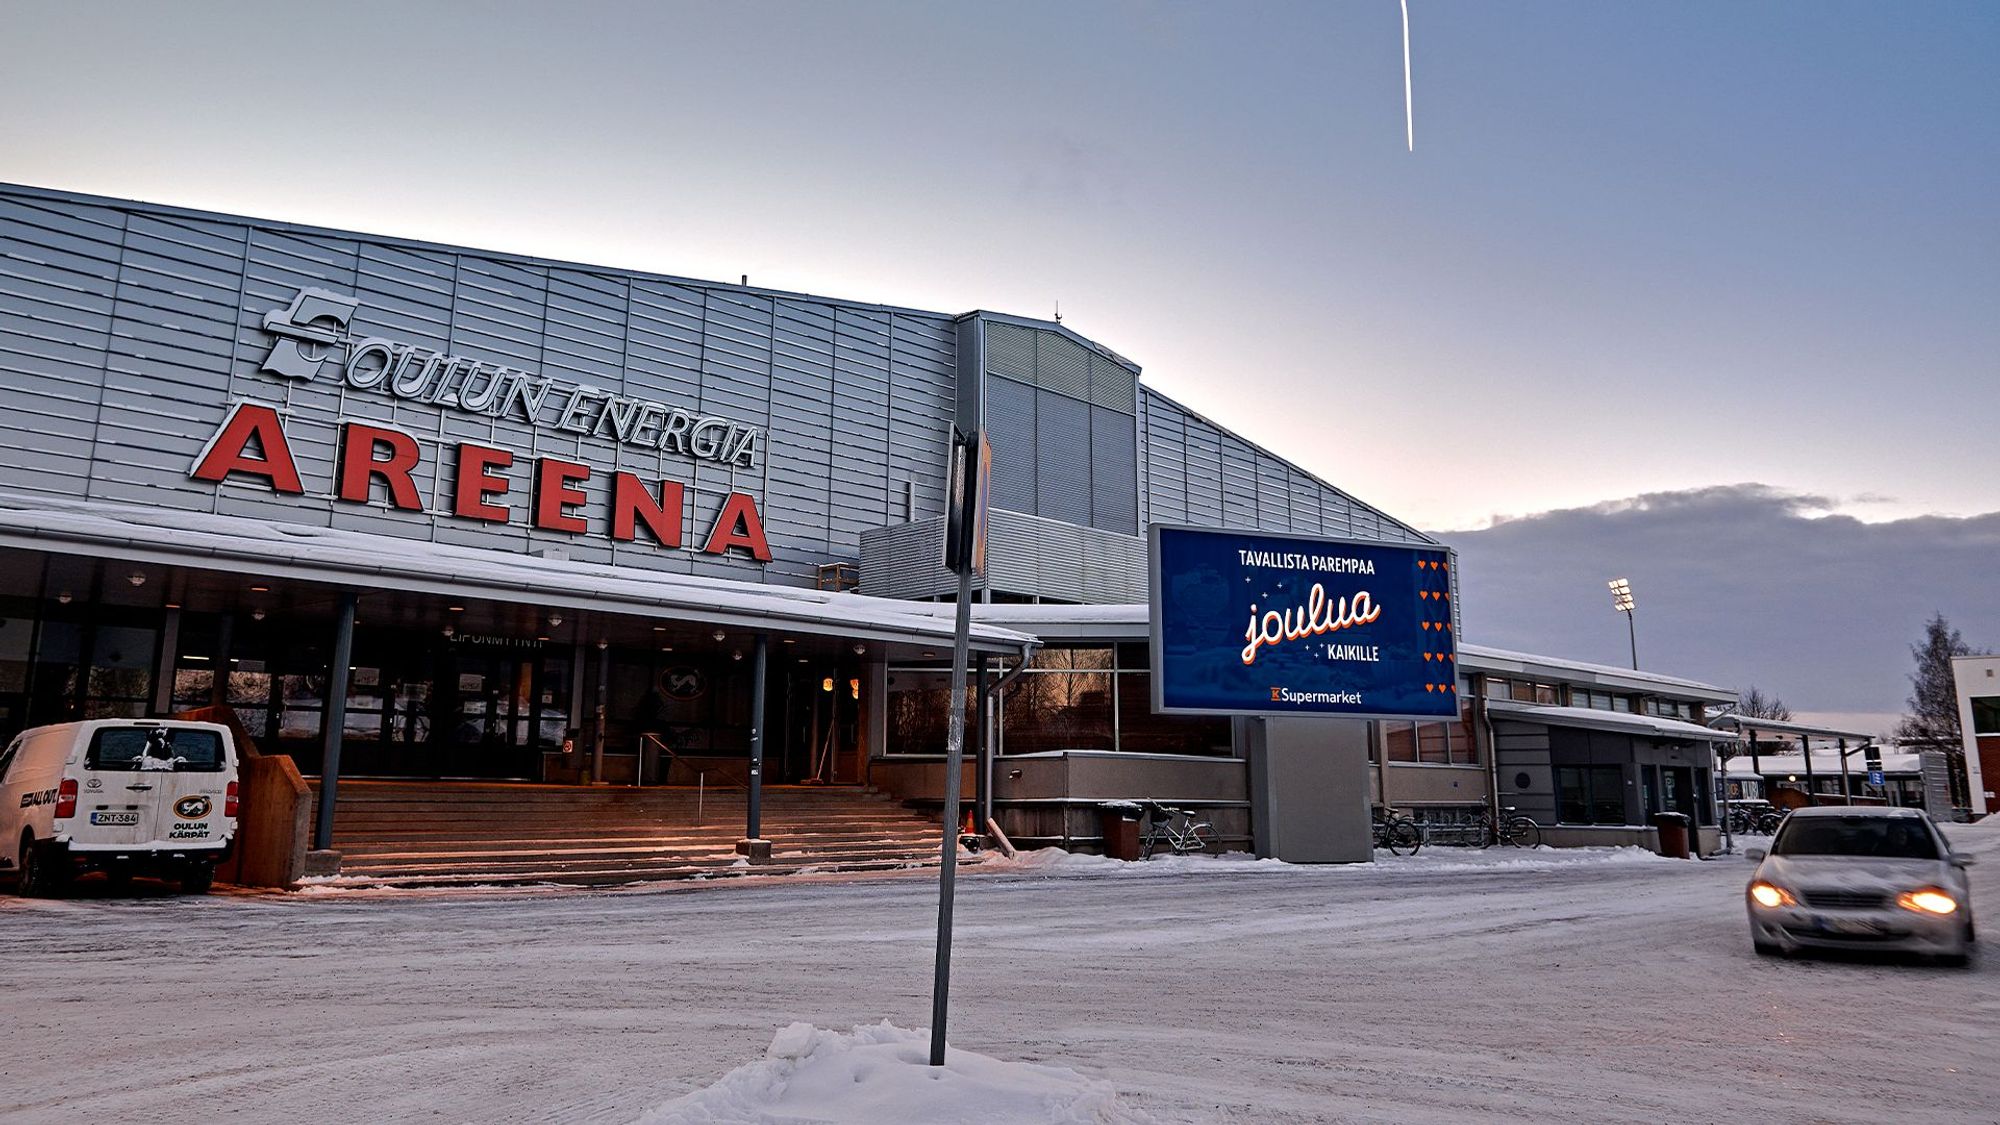 Picture of a screen in Raksila hokey arena during winter